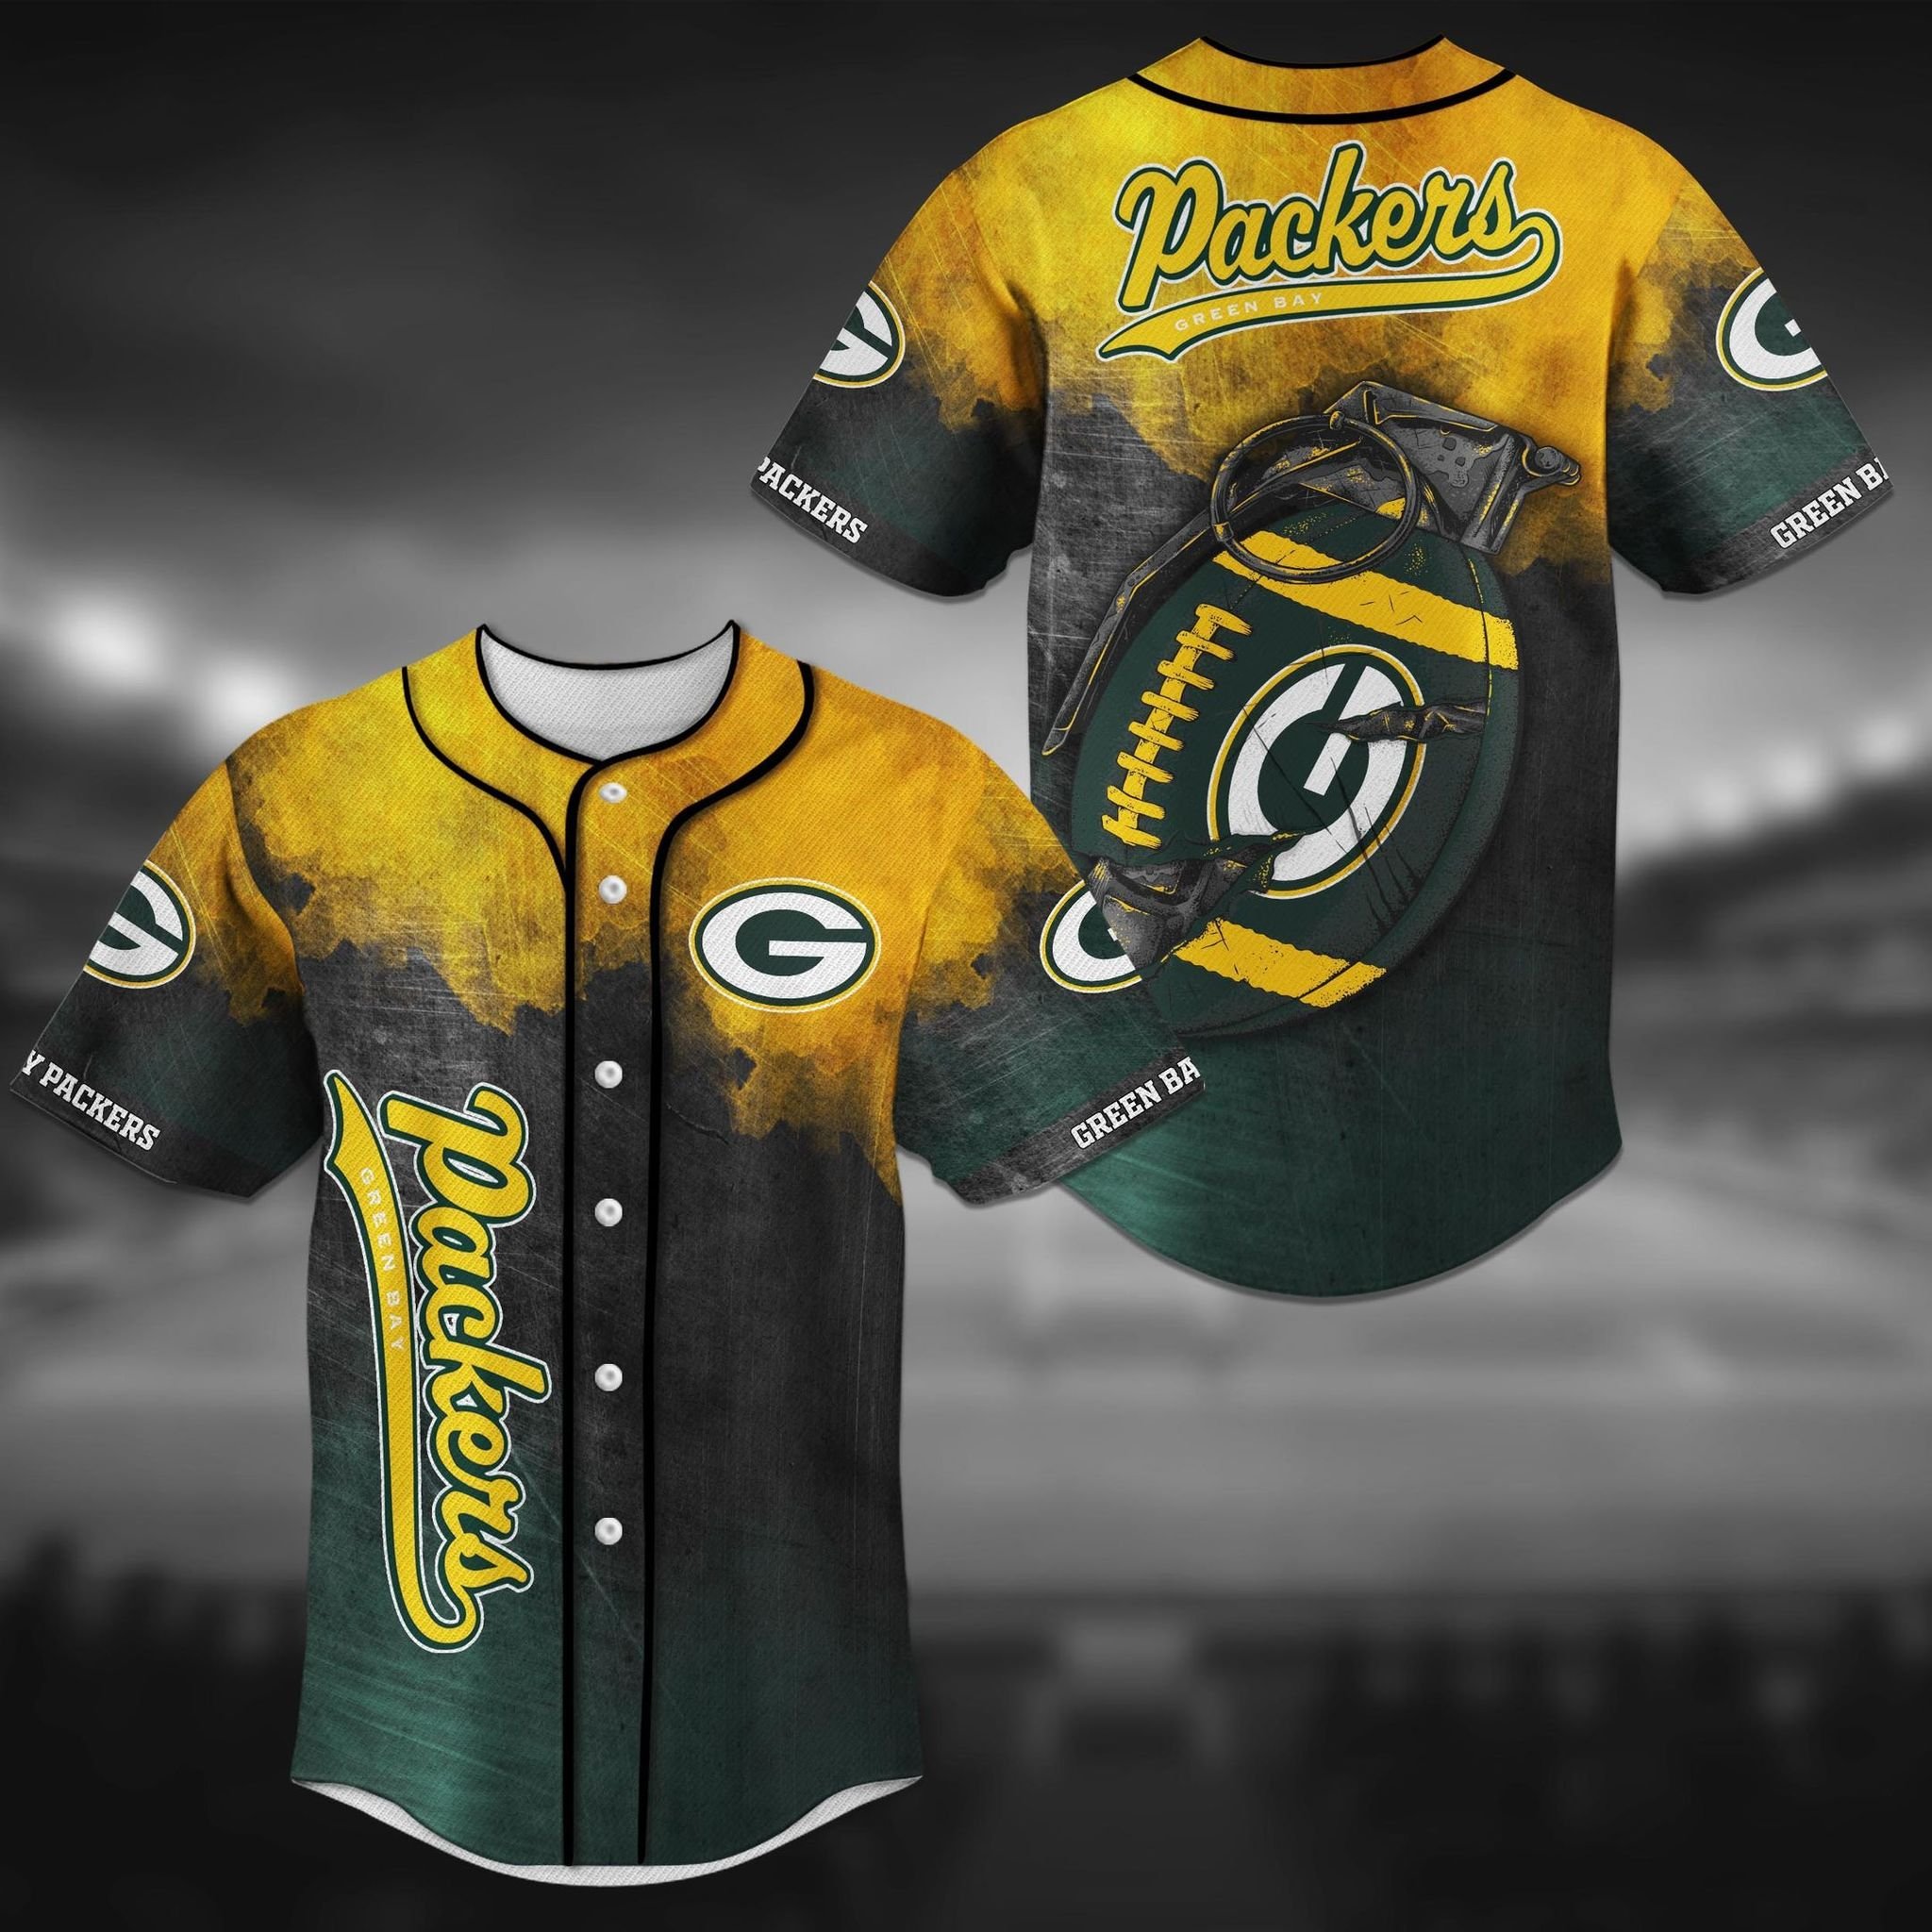 NFL Green Bay Packers bomb baseball jersey – LIMITED EDITION